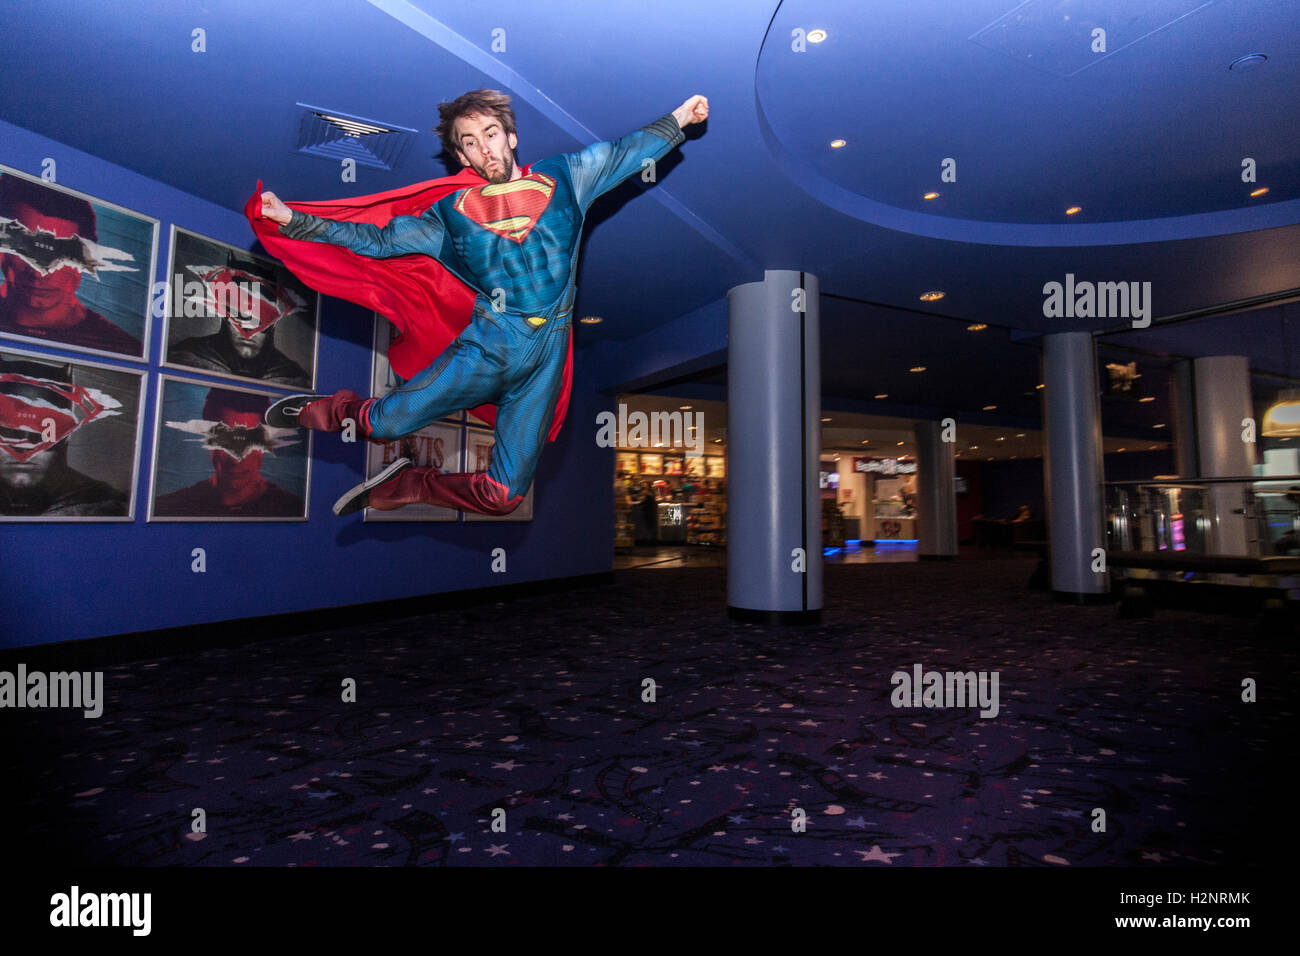 Team member of Cineworld dressed up as Superman flying through the cinema to promote the opening weekend of Batman V Superman. Stock Photo